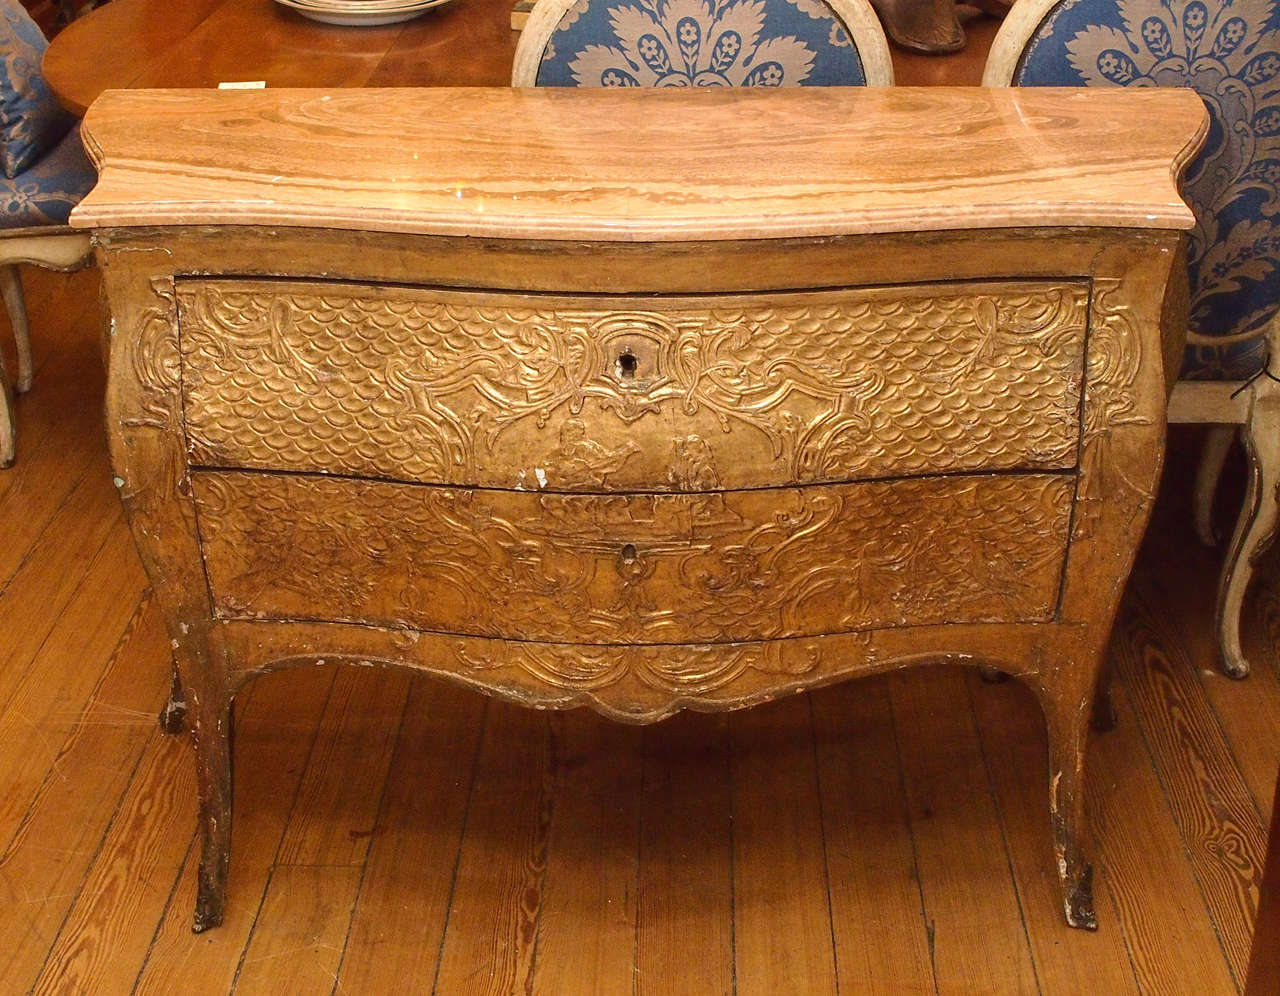 Italian Bombe Strapwork gilt commode with book matched onyx top.
18th c.